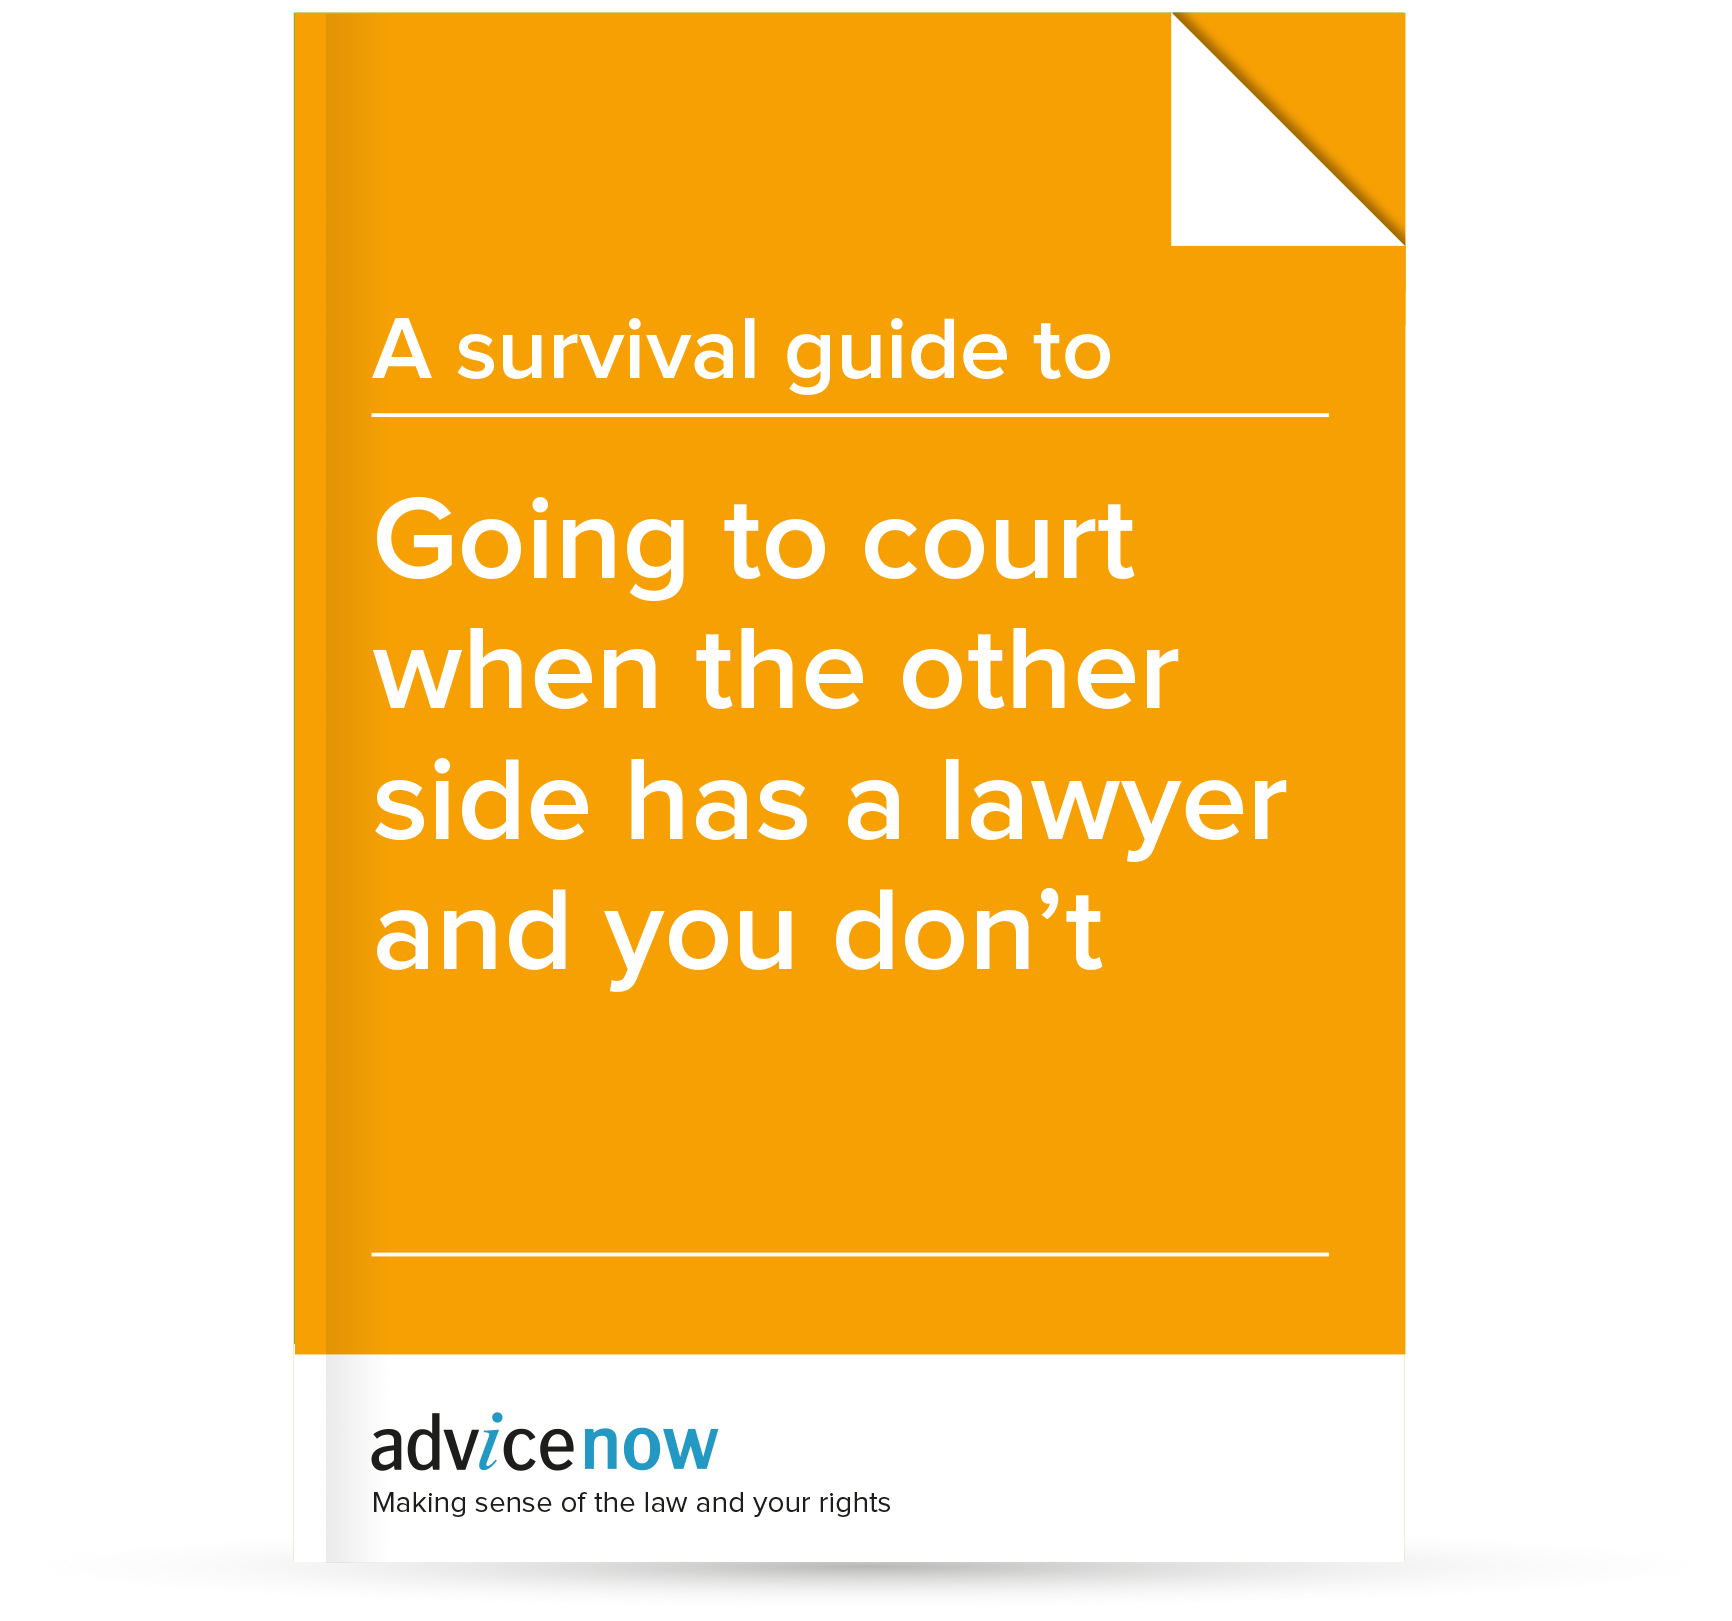 A survival guide to going to court when the other side has a lawyer and